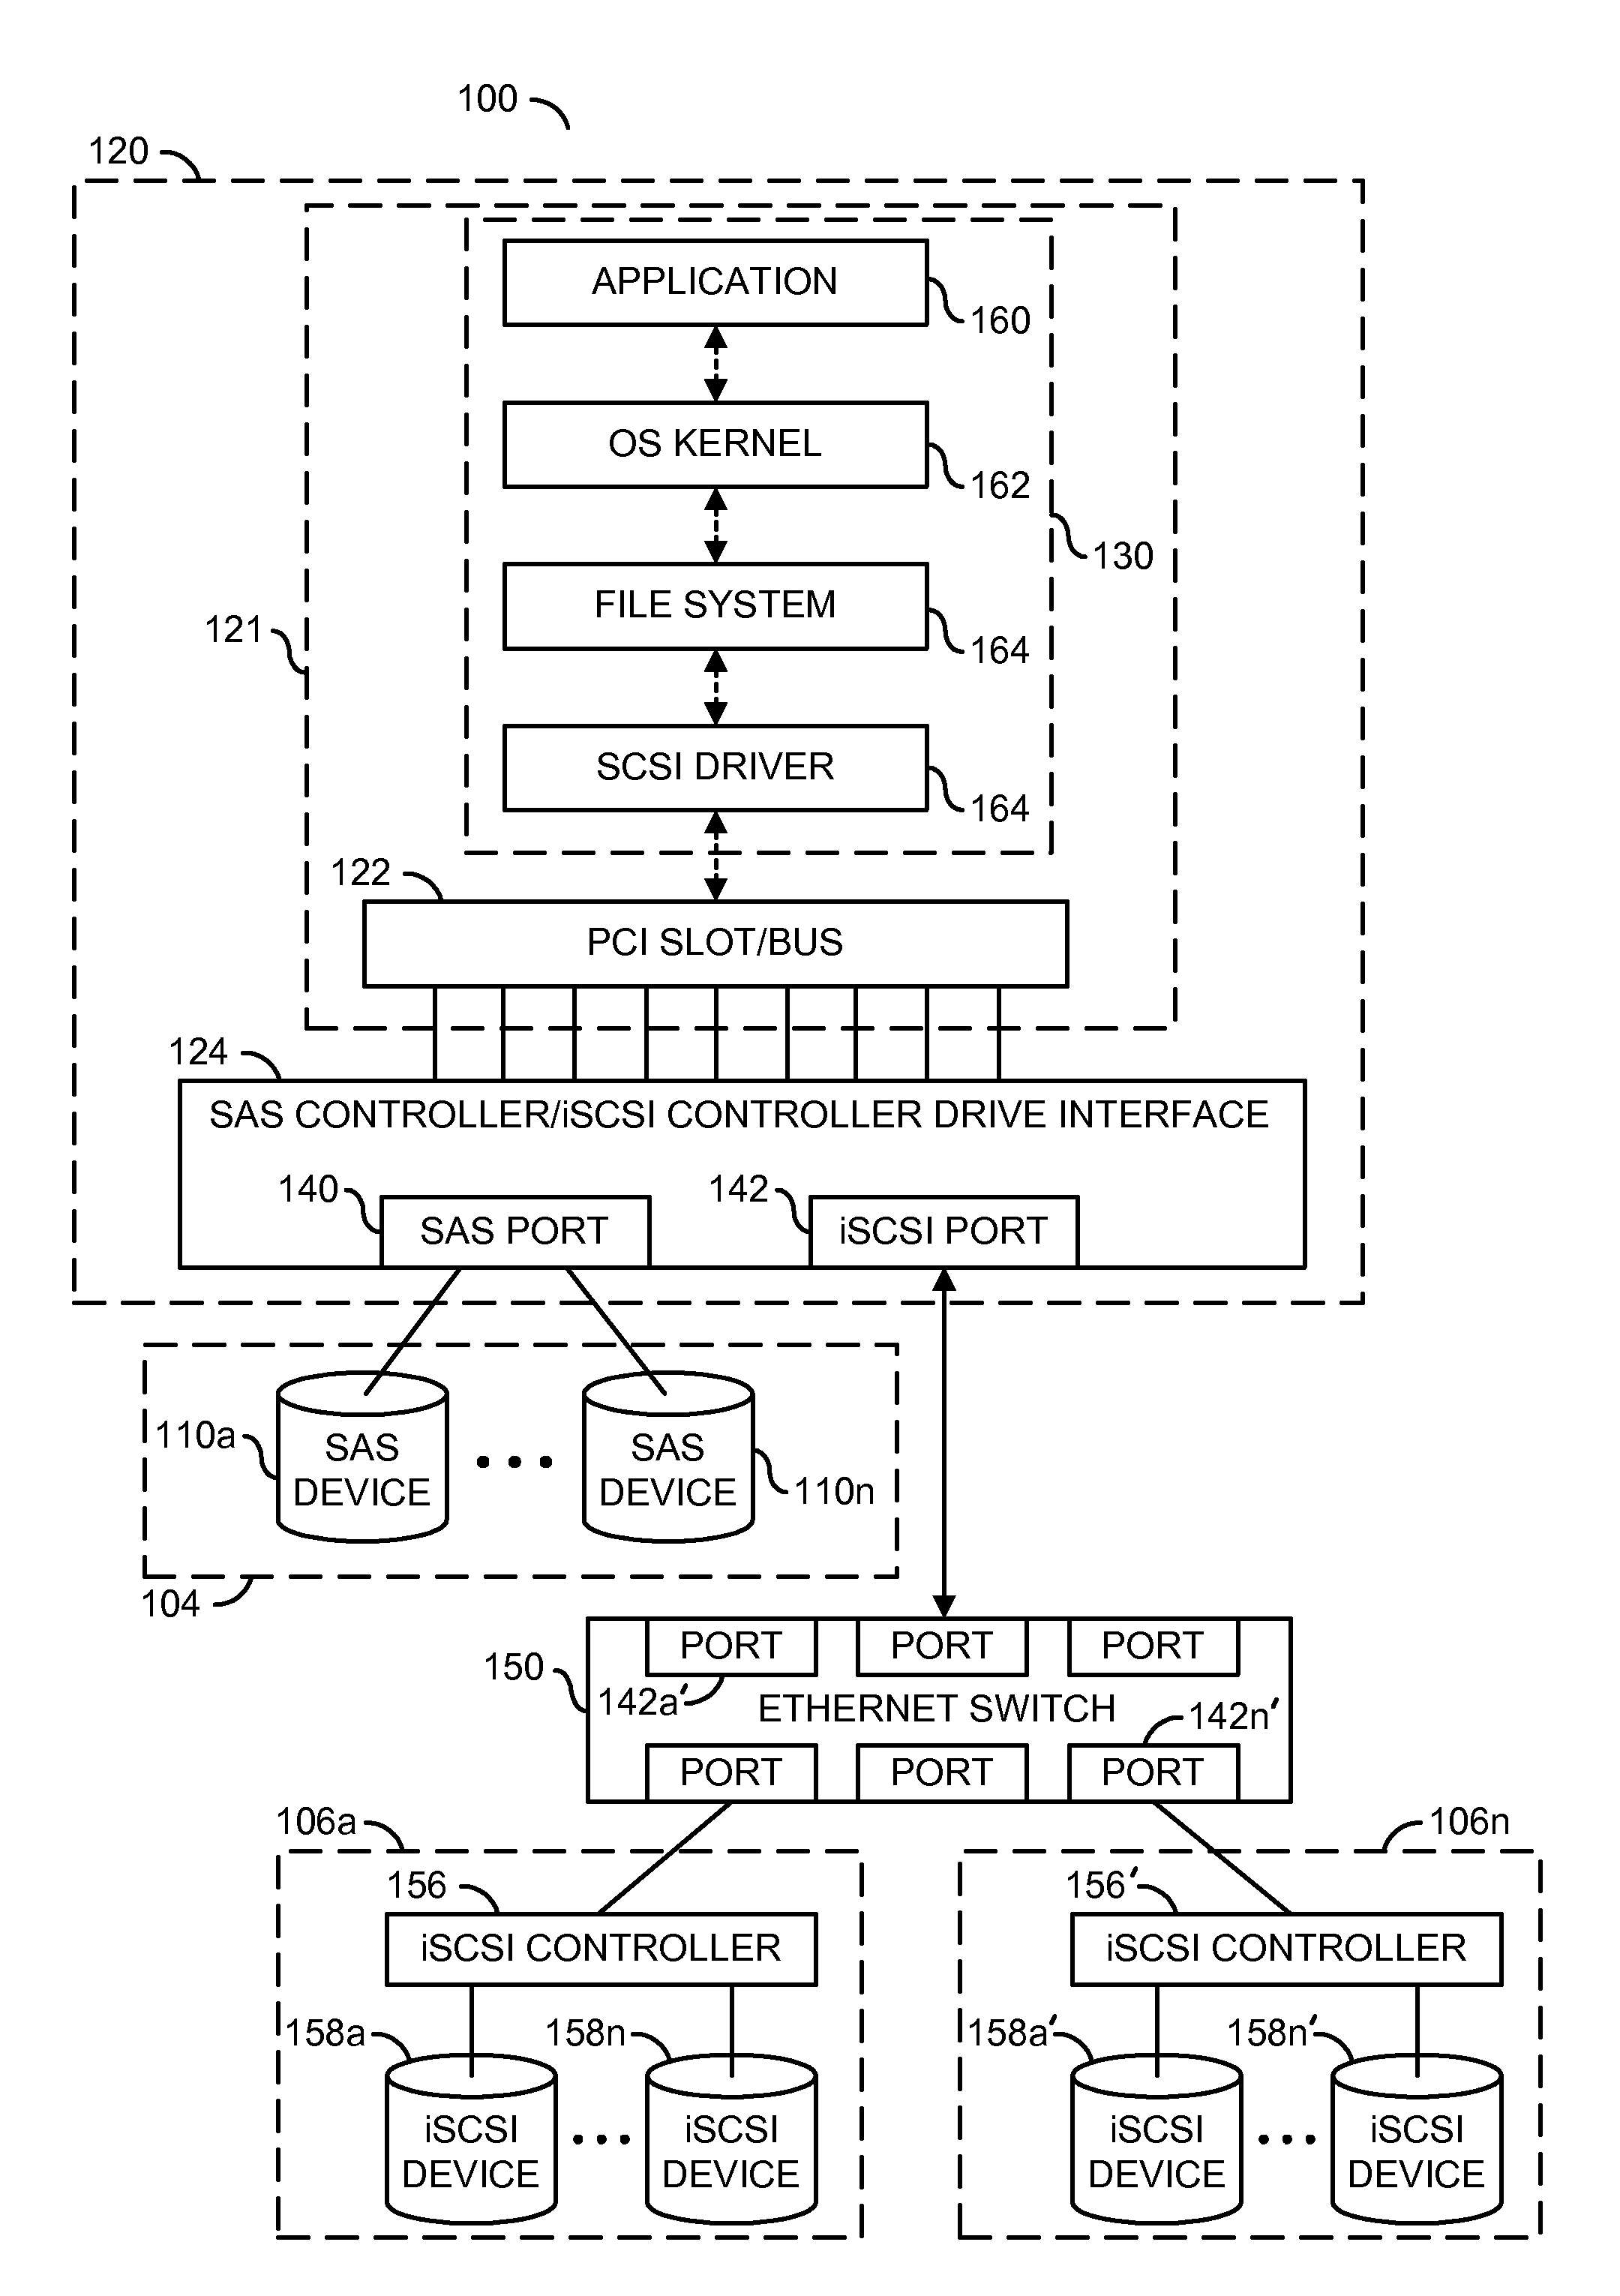 METHOD AND SYSTEM FOR COUPLING SERIAL ATTACHED SCSI (SAS) DEVICES AND INTERNET SMALL COMPUTER SYSTEM INTERNET (iSCSI) DEVICES THROUGH SINGLE HOST BUS ADAPTER